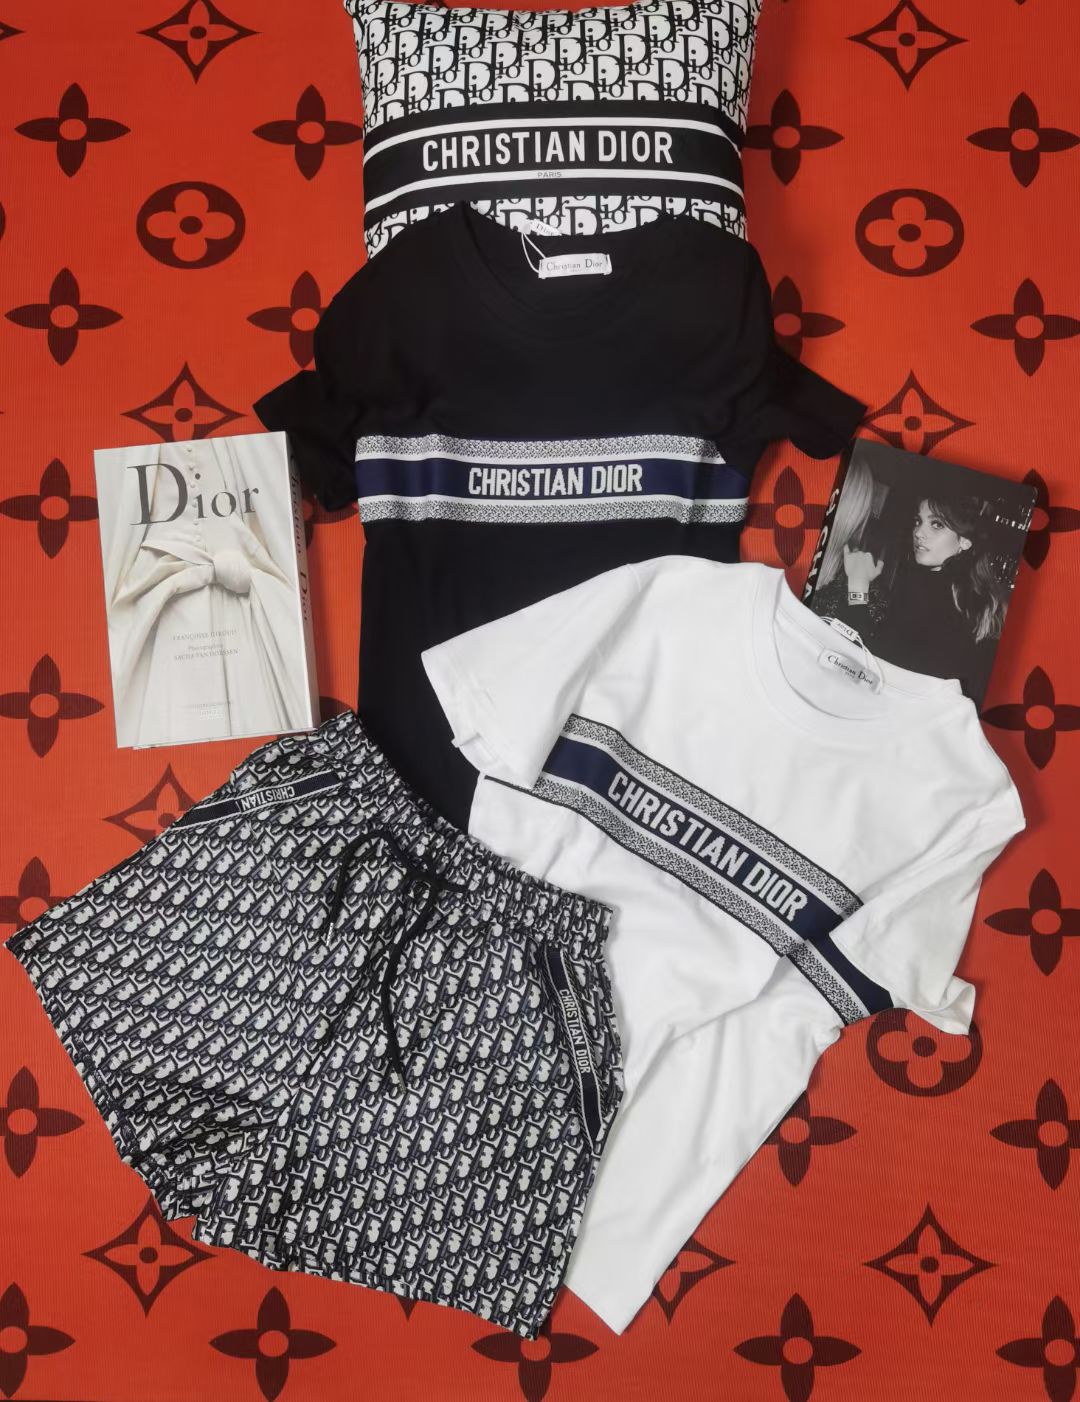 Dior Clothing Shirts & Blouses T-Shirt Black White Cotton Summer Collection